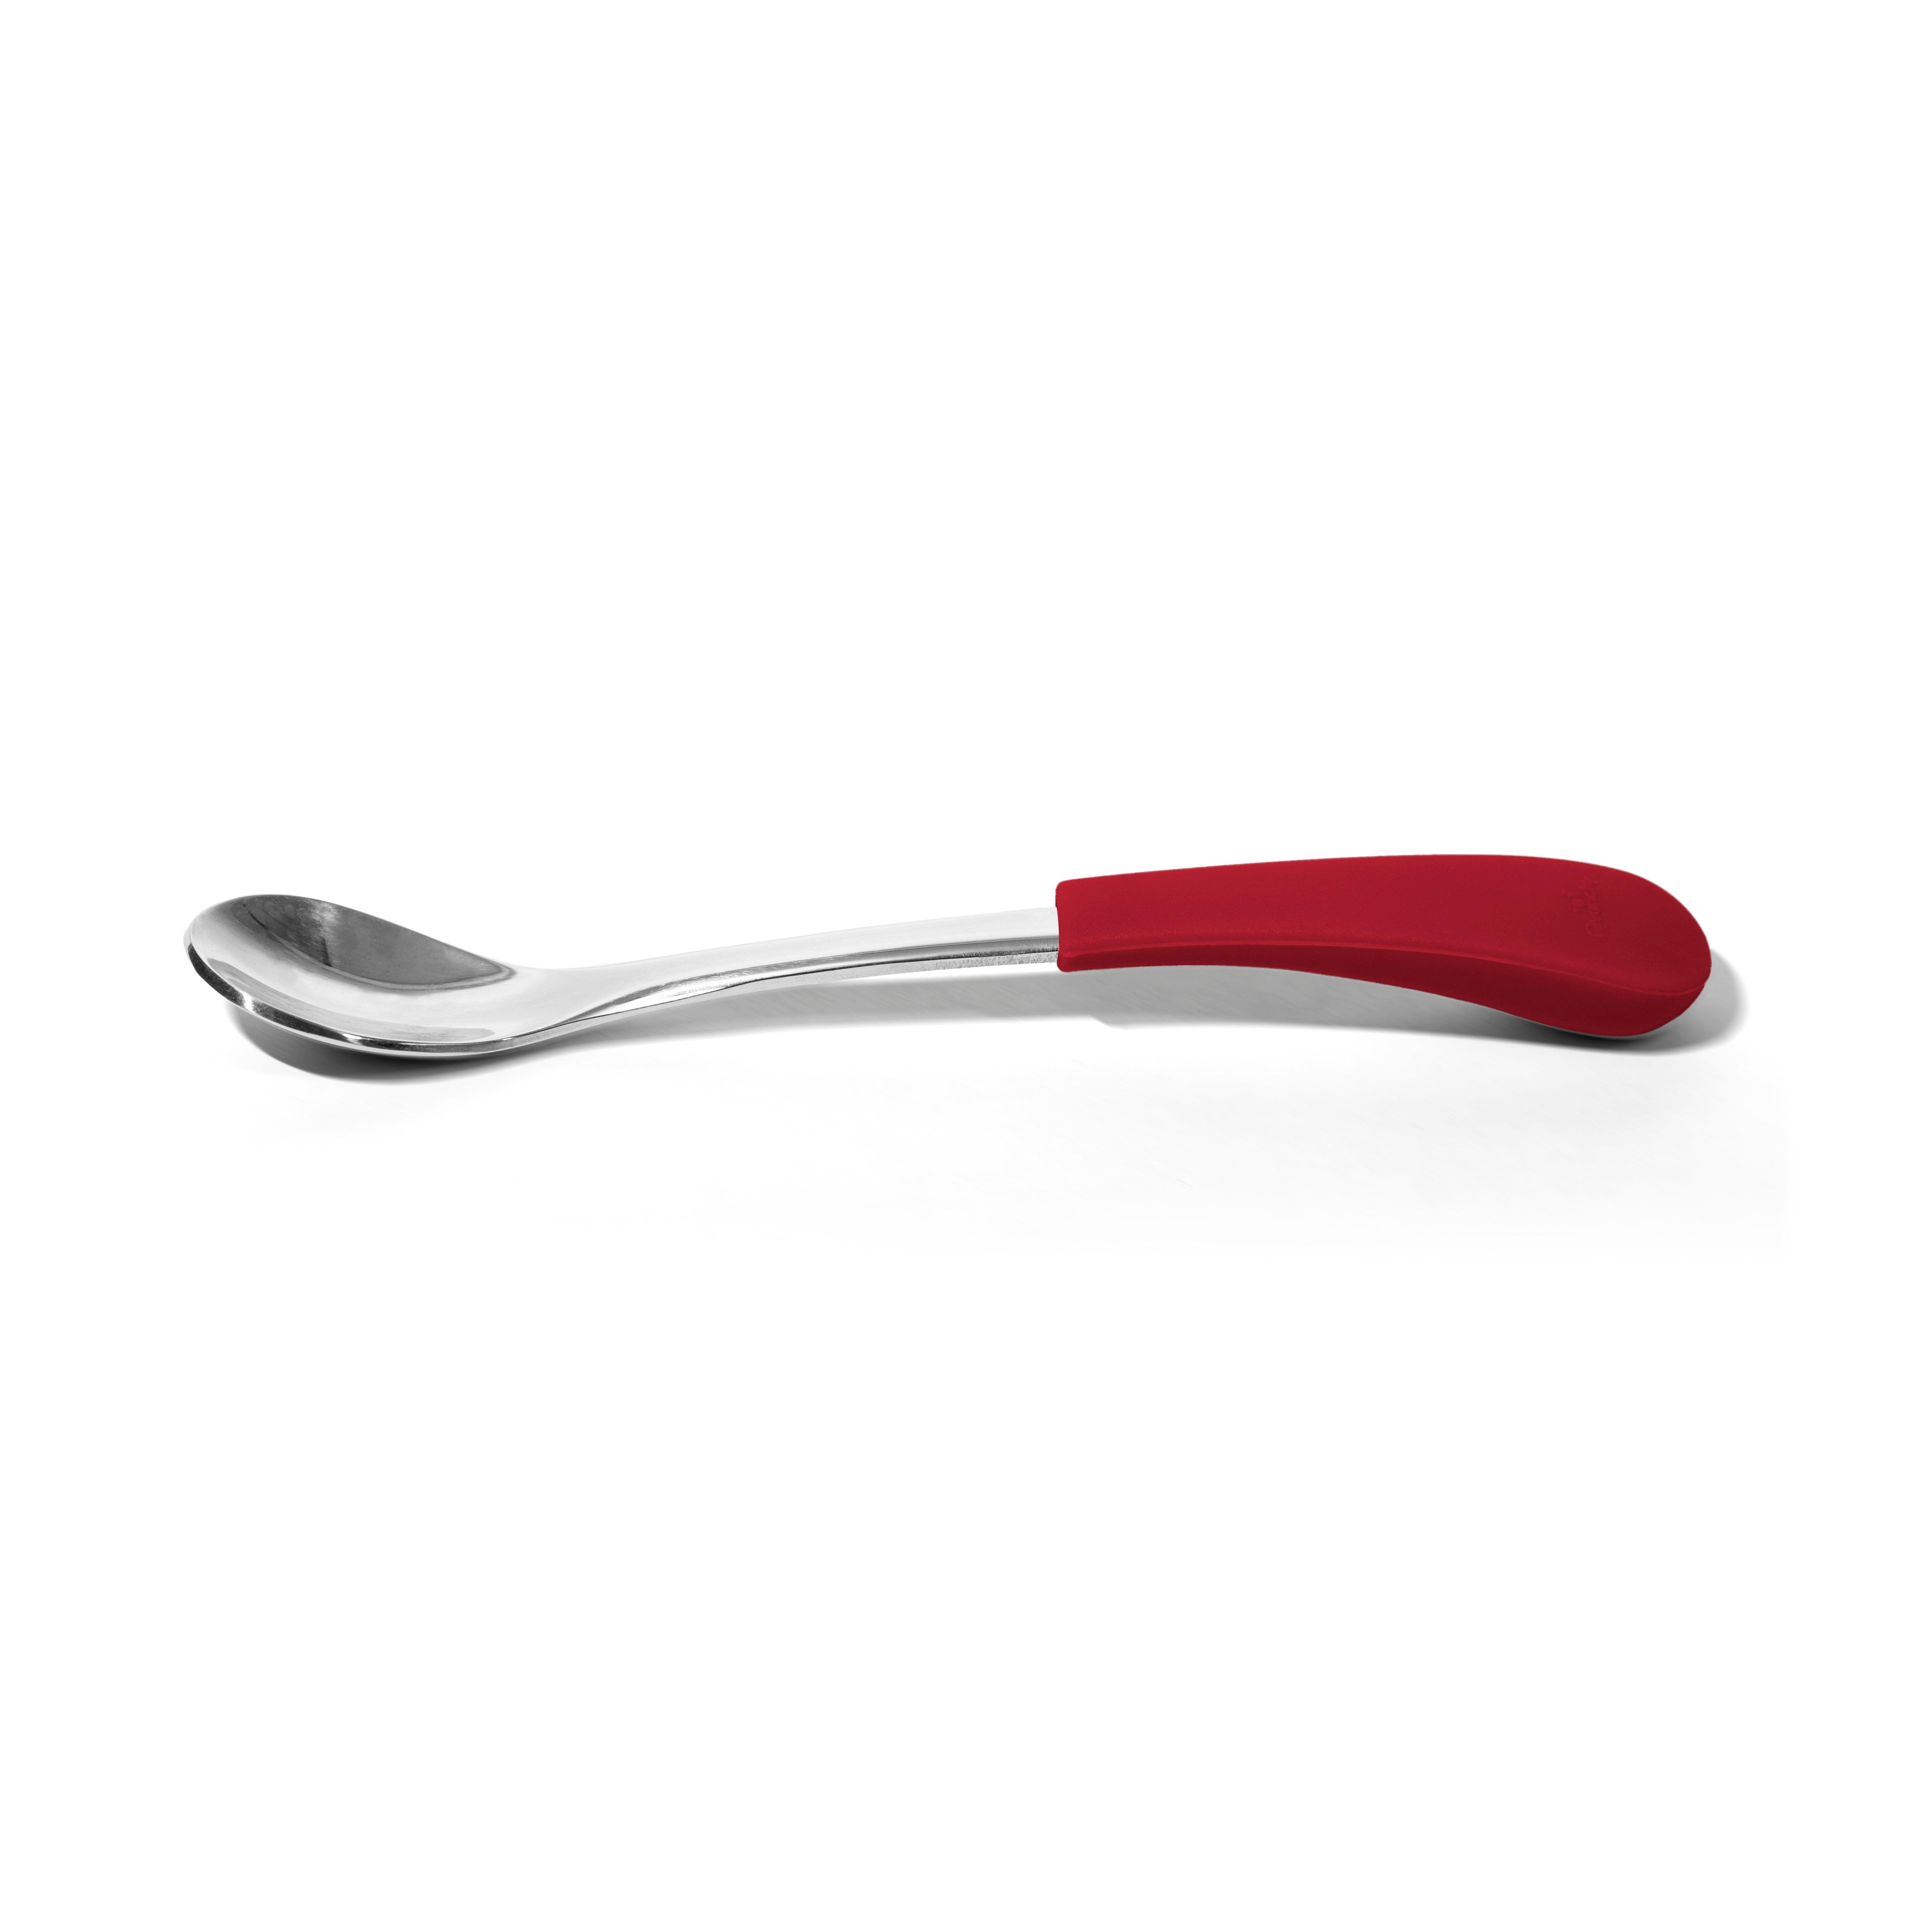 Single Stainless Steel Infant Spoon